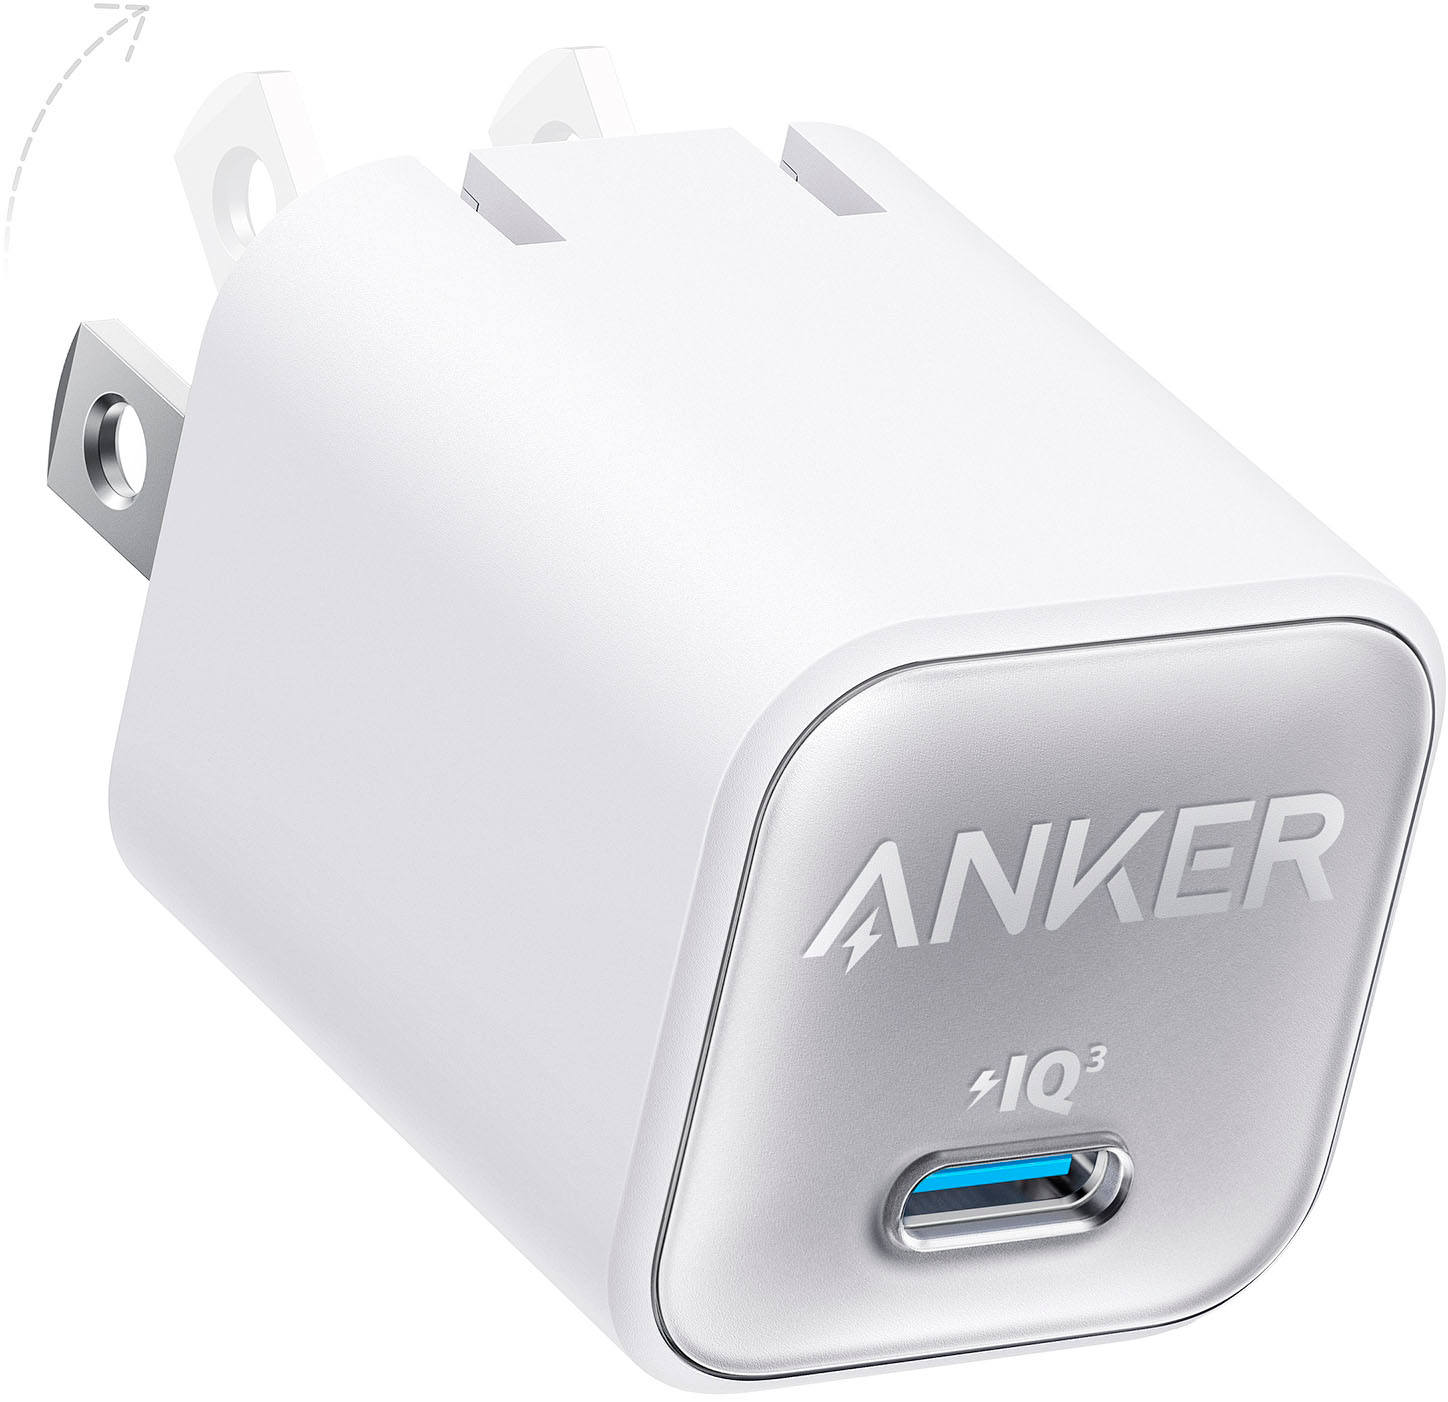 

Anker - 511 (Nano 3) 30W Wall Charger with USB-C GaN for iPhone 14/14 Pro/14 Pro Max/13 Pro/13 Pro Max, Galaxy, iPad - Aurora White